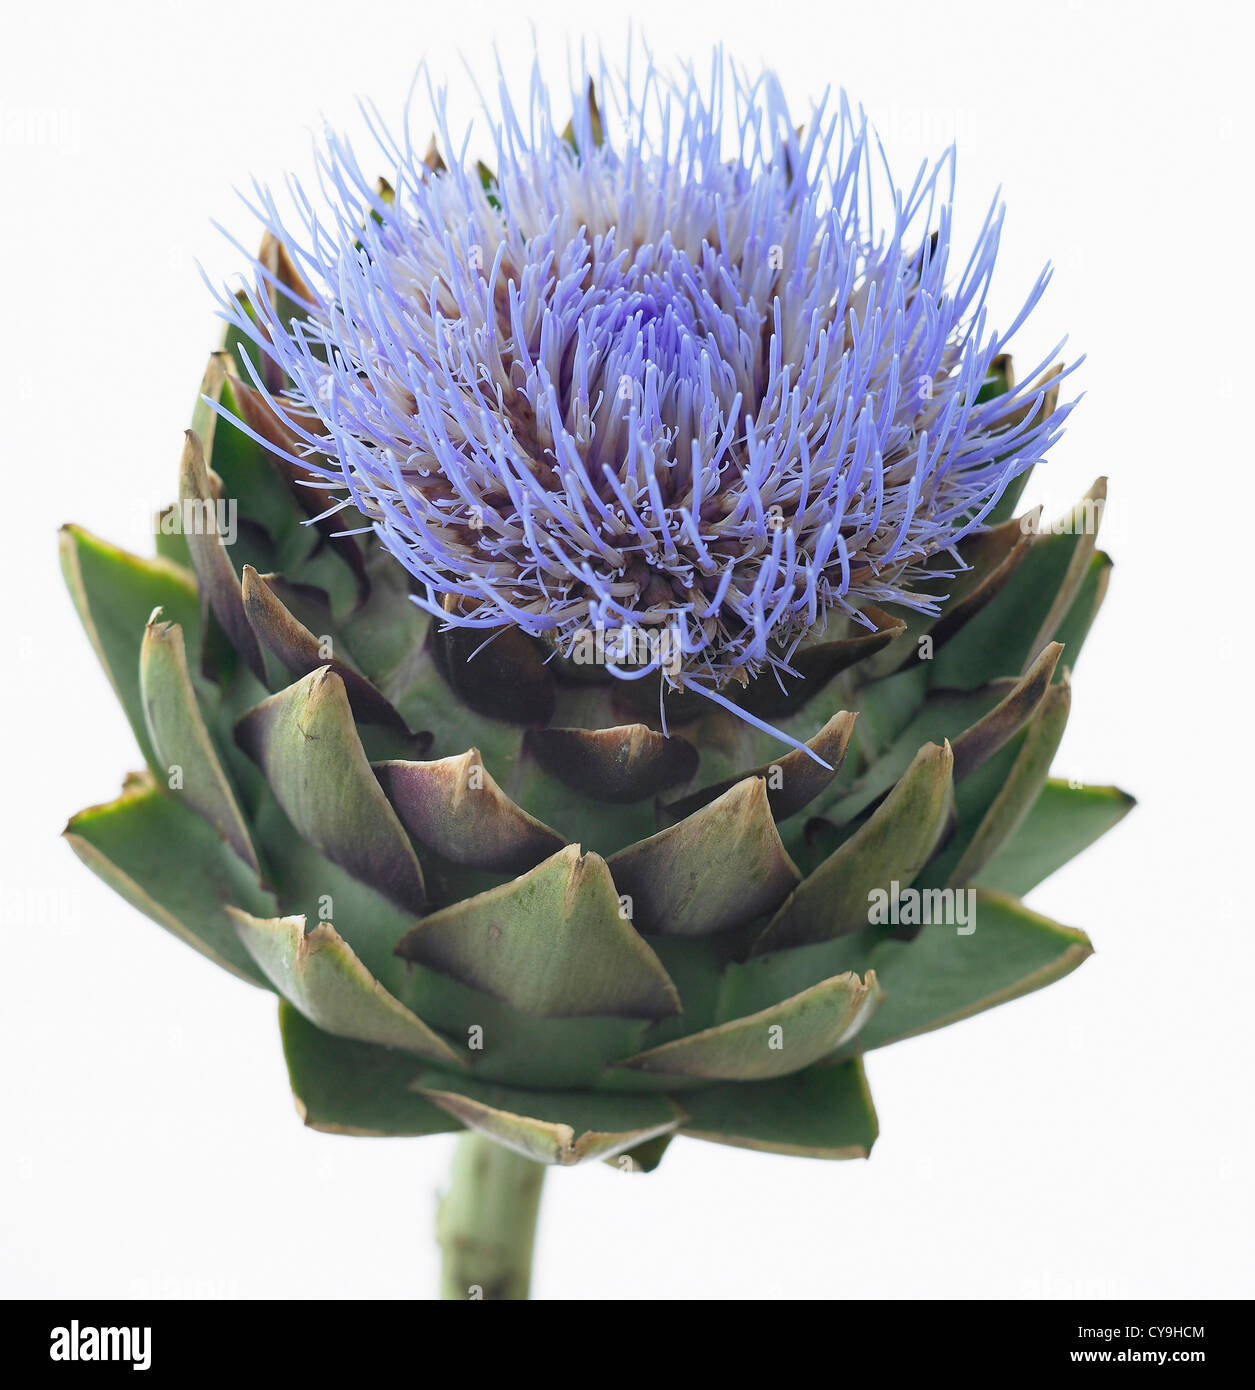 Cynara scolymus, Globe artichoke. Blue flower above the lobed green leaves of this perennial edible thistle. Stock Photo